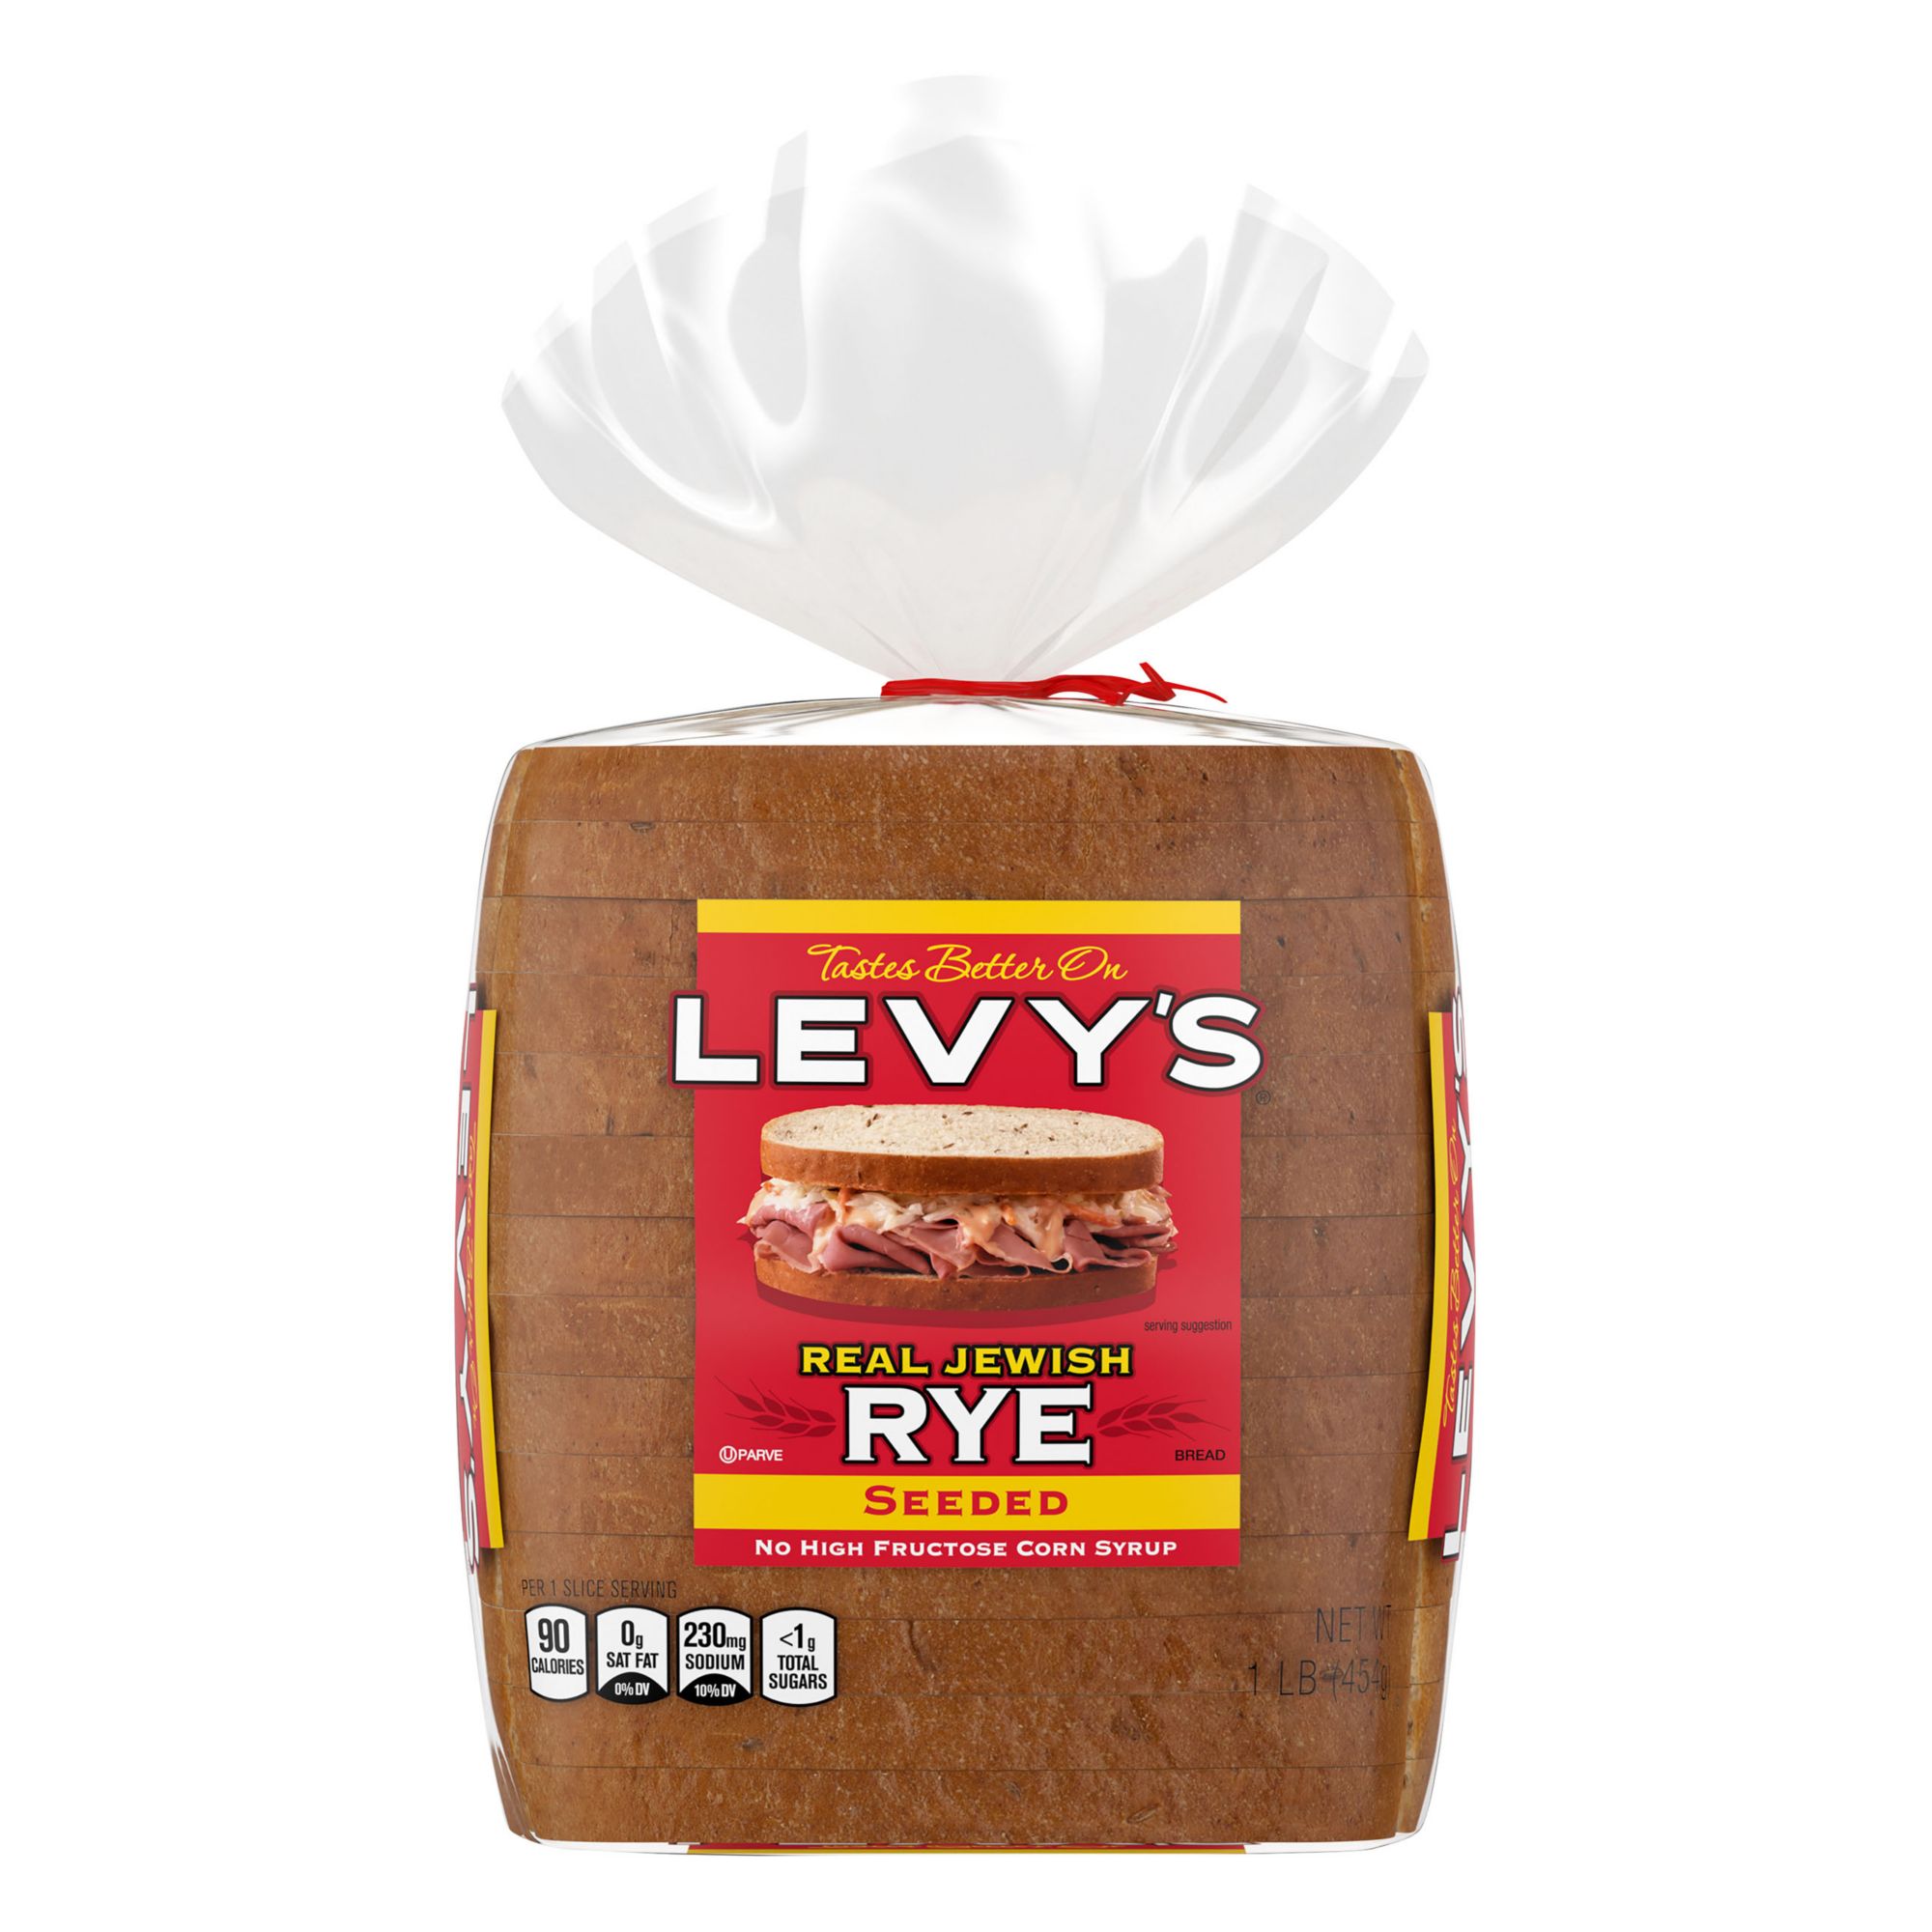 Levy's Hearty Seeded Rye Bread, 16 oz.